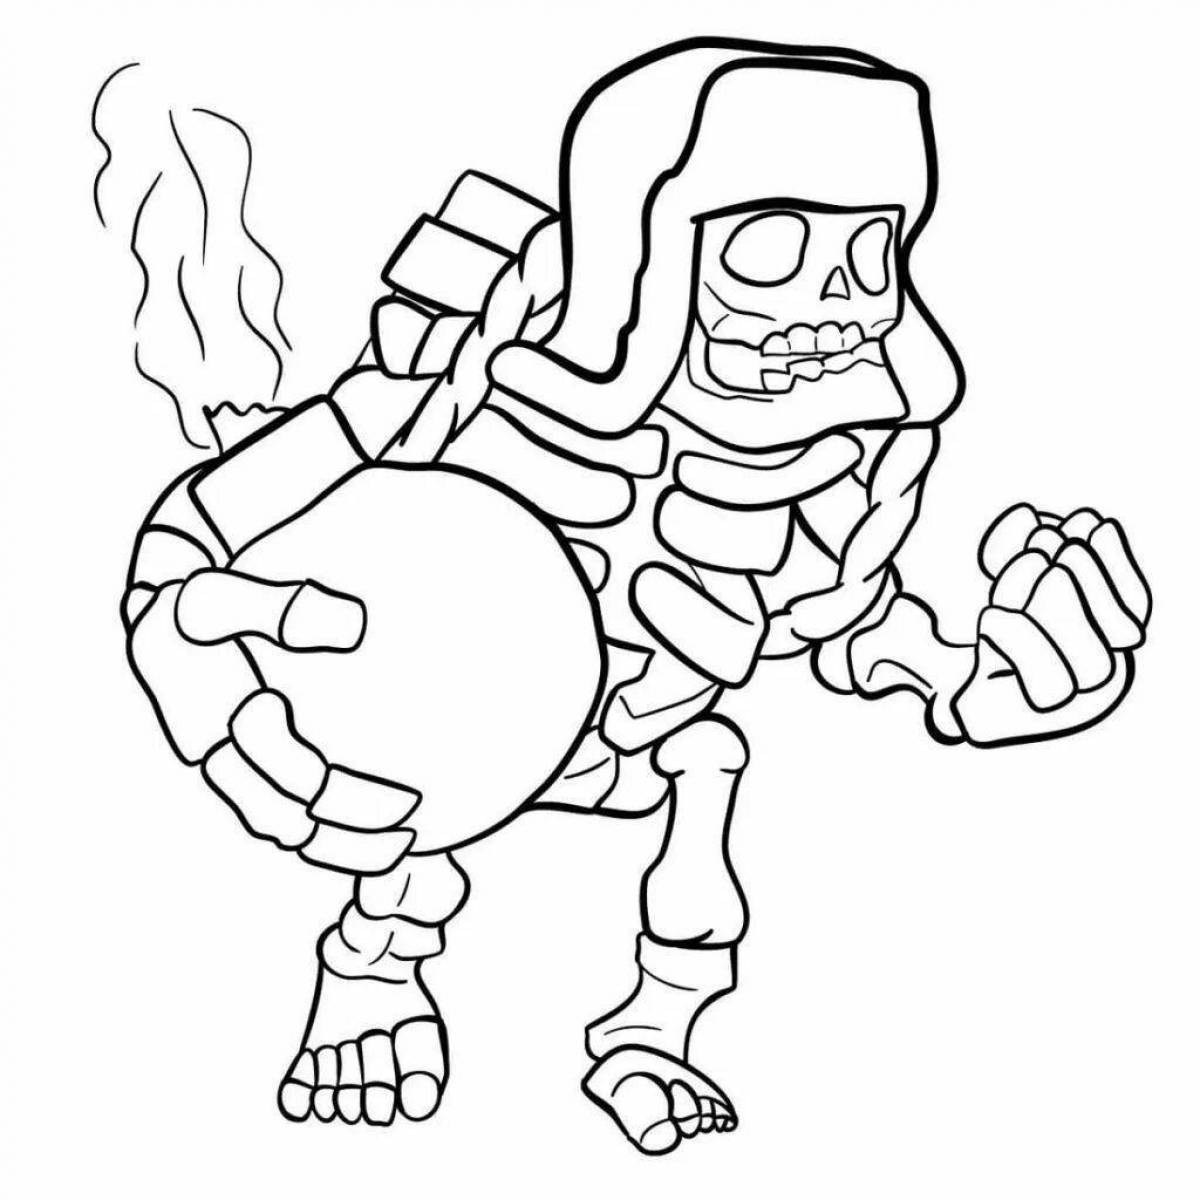 Colorful clash royale arena coloring page